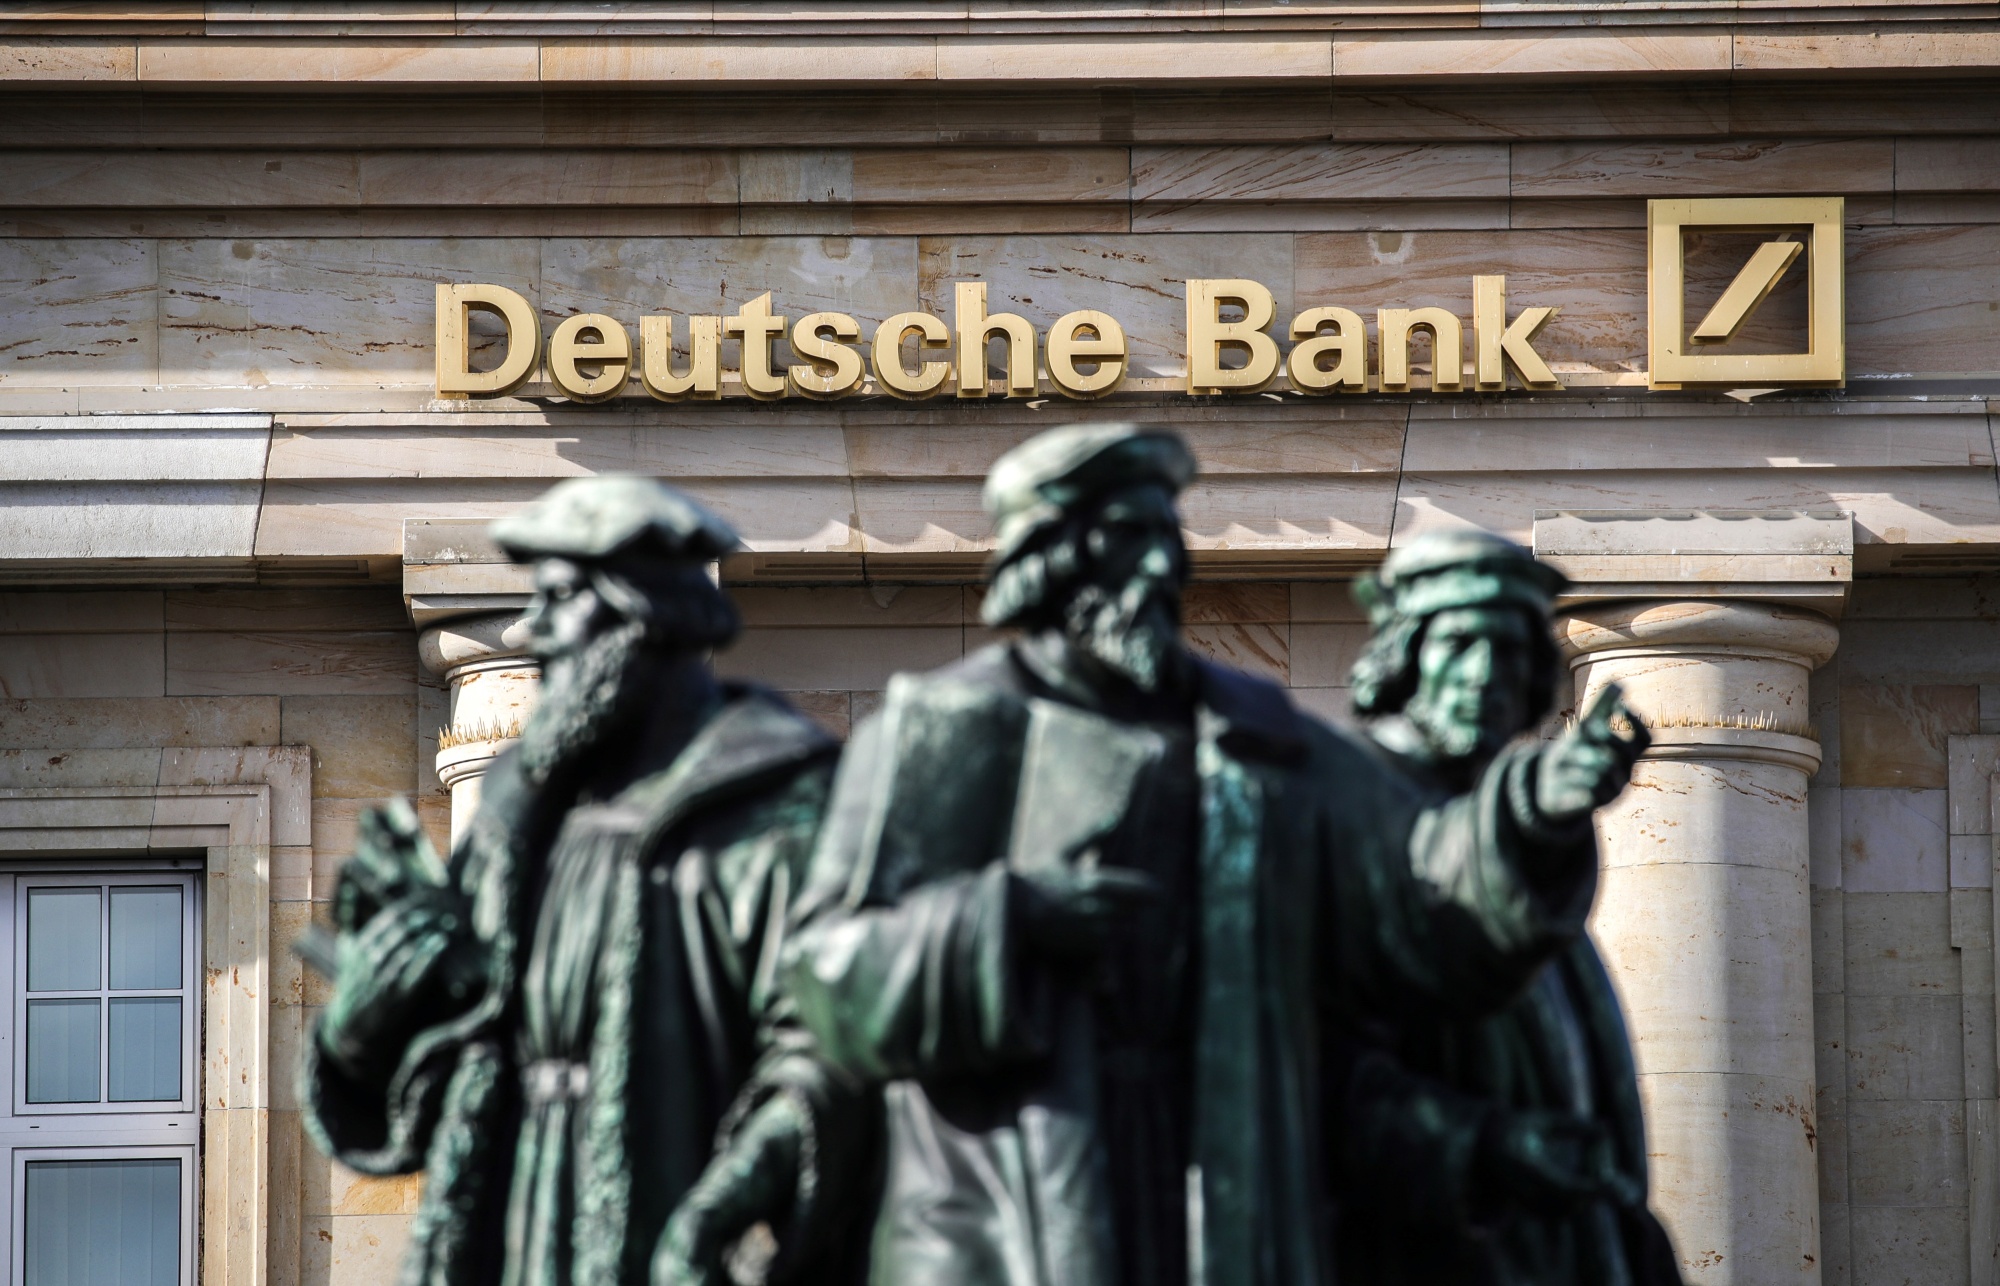 The US investment firm held a stake of 3.04% in Deutsche Bank as of April 10.